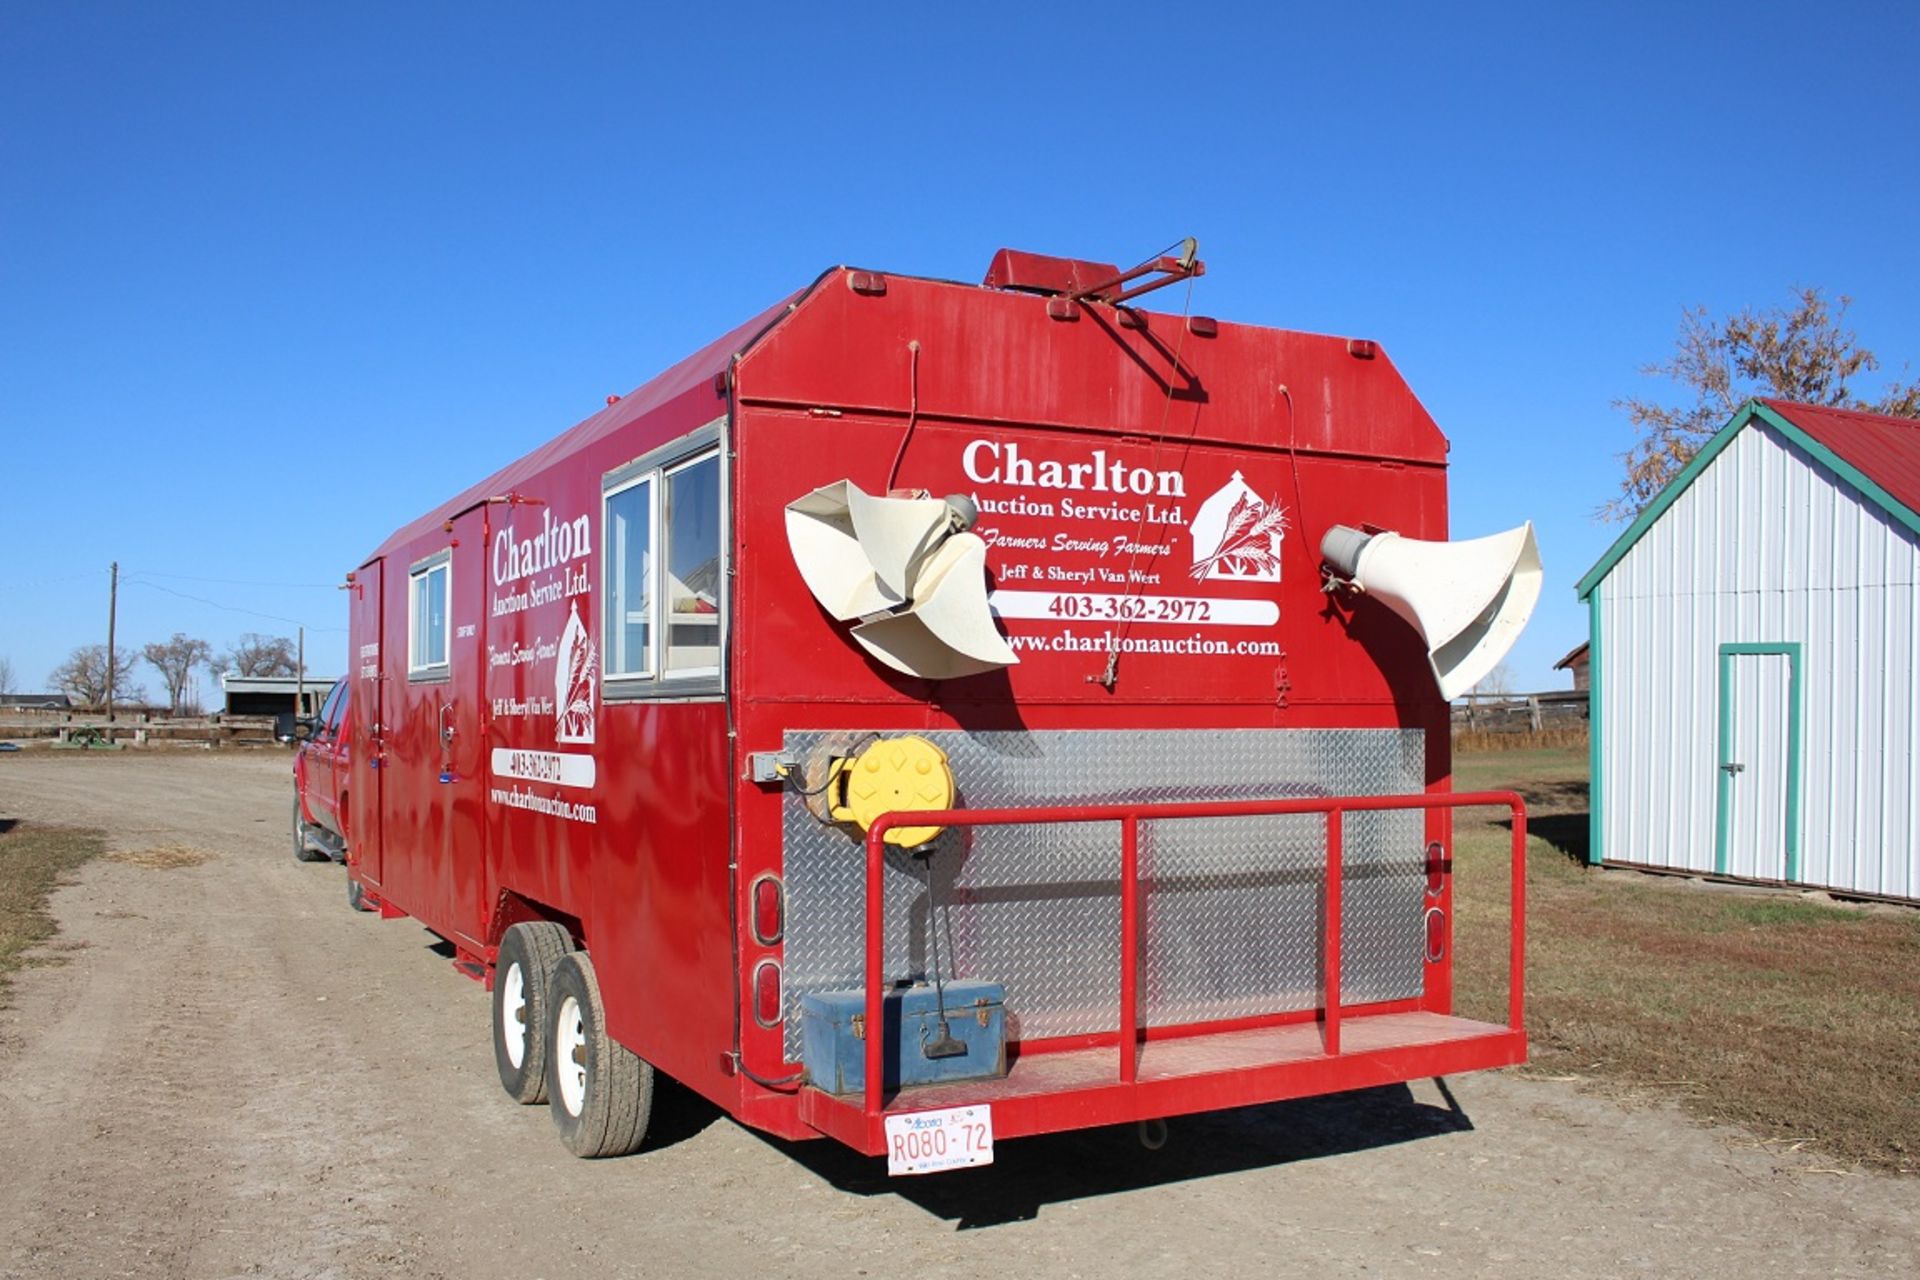 2002 SHOP BUILT 24' T/A 5W AUCTION OFFICE TRAILER W/LIGHTS, HEATER, BATHROOM & AUCTION/BOOTH - Image 3 of 8